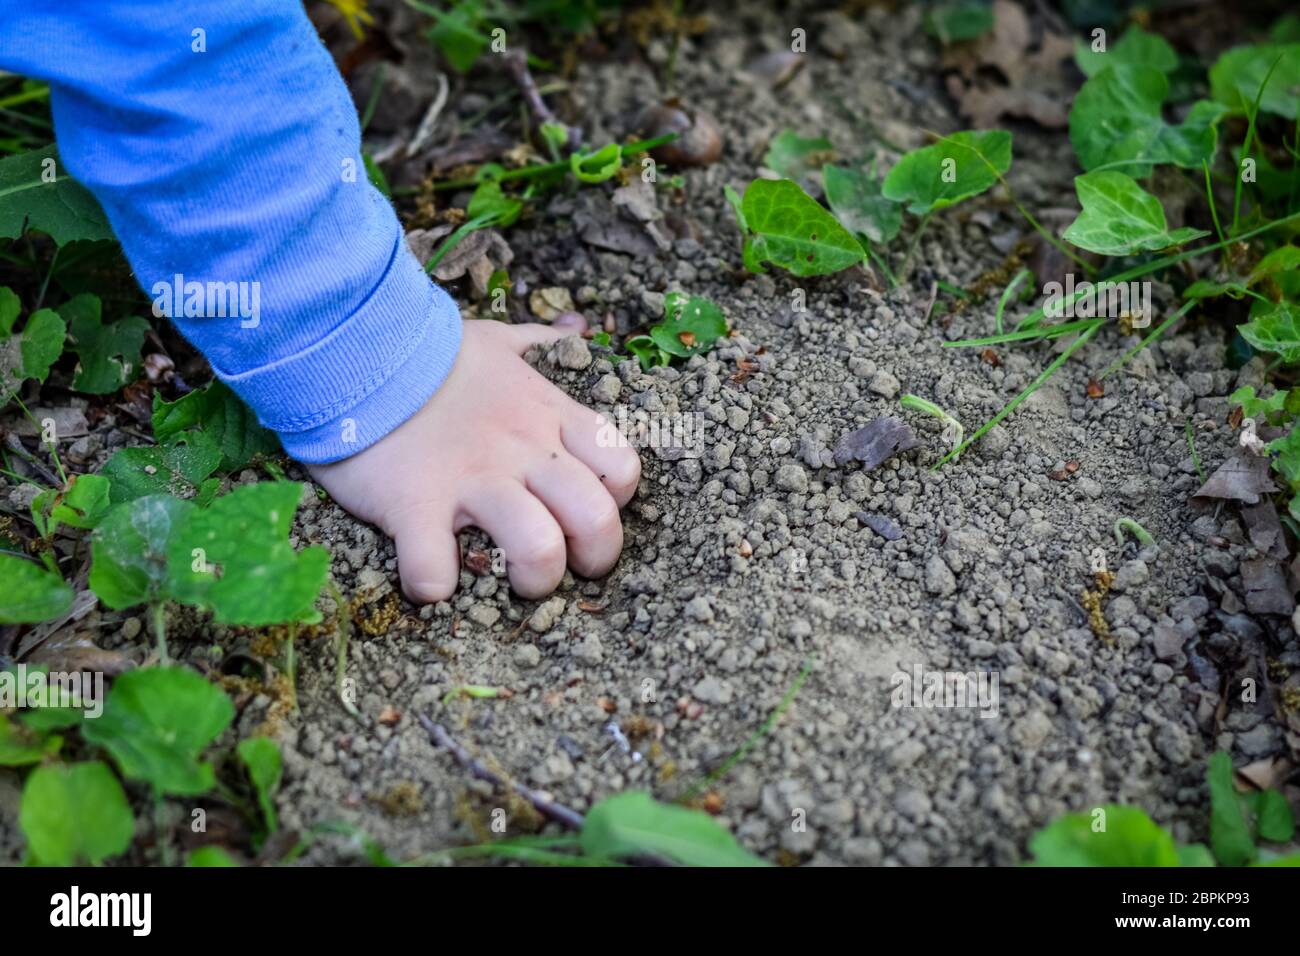 Toddler's hand digging the ground close up Stock Photo